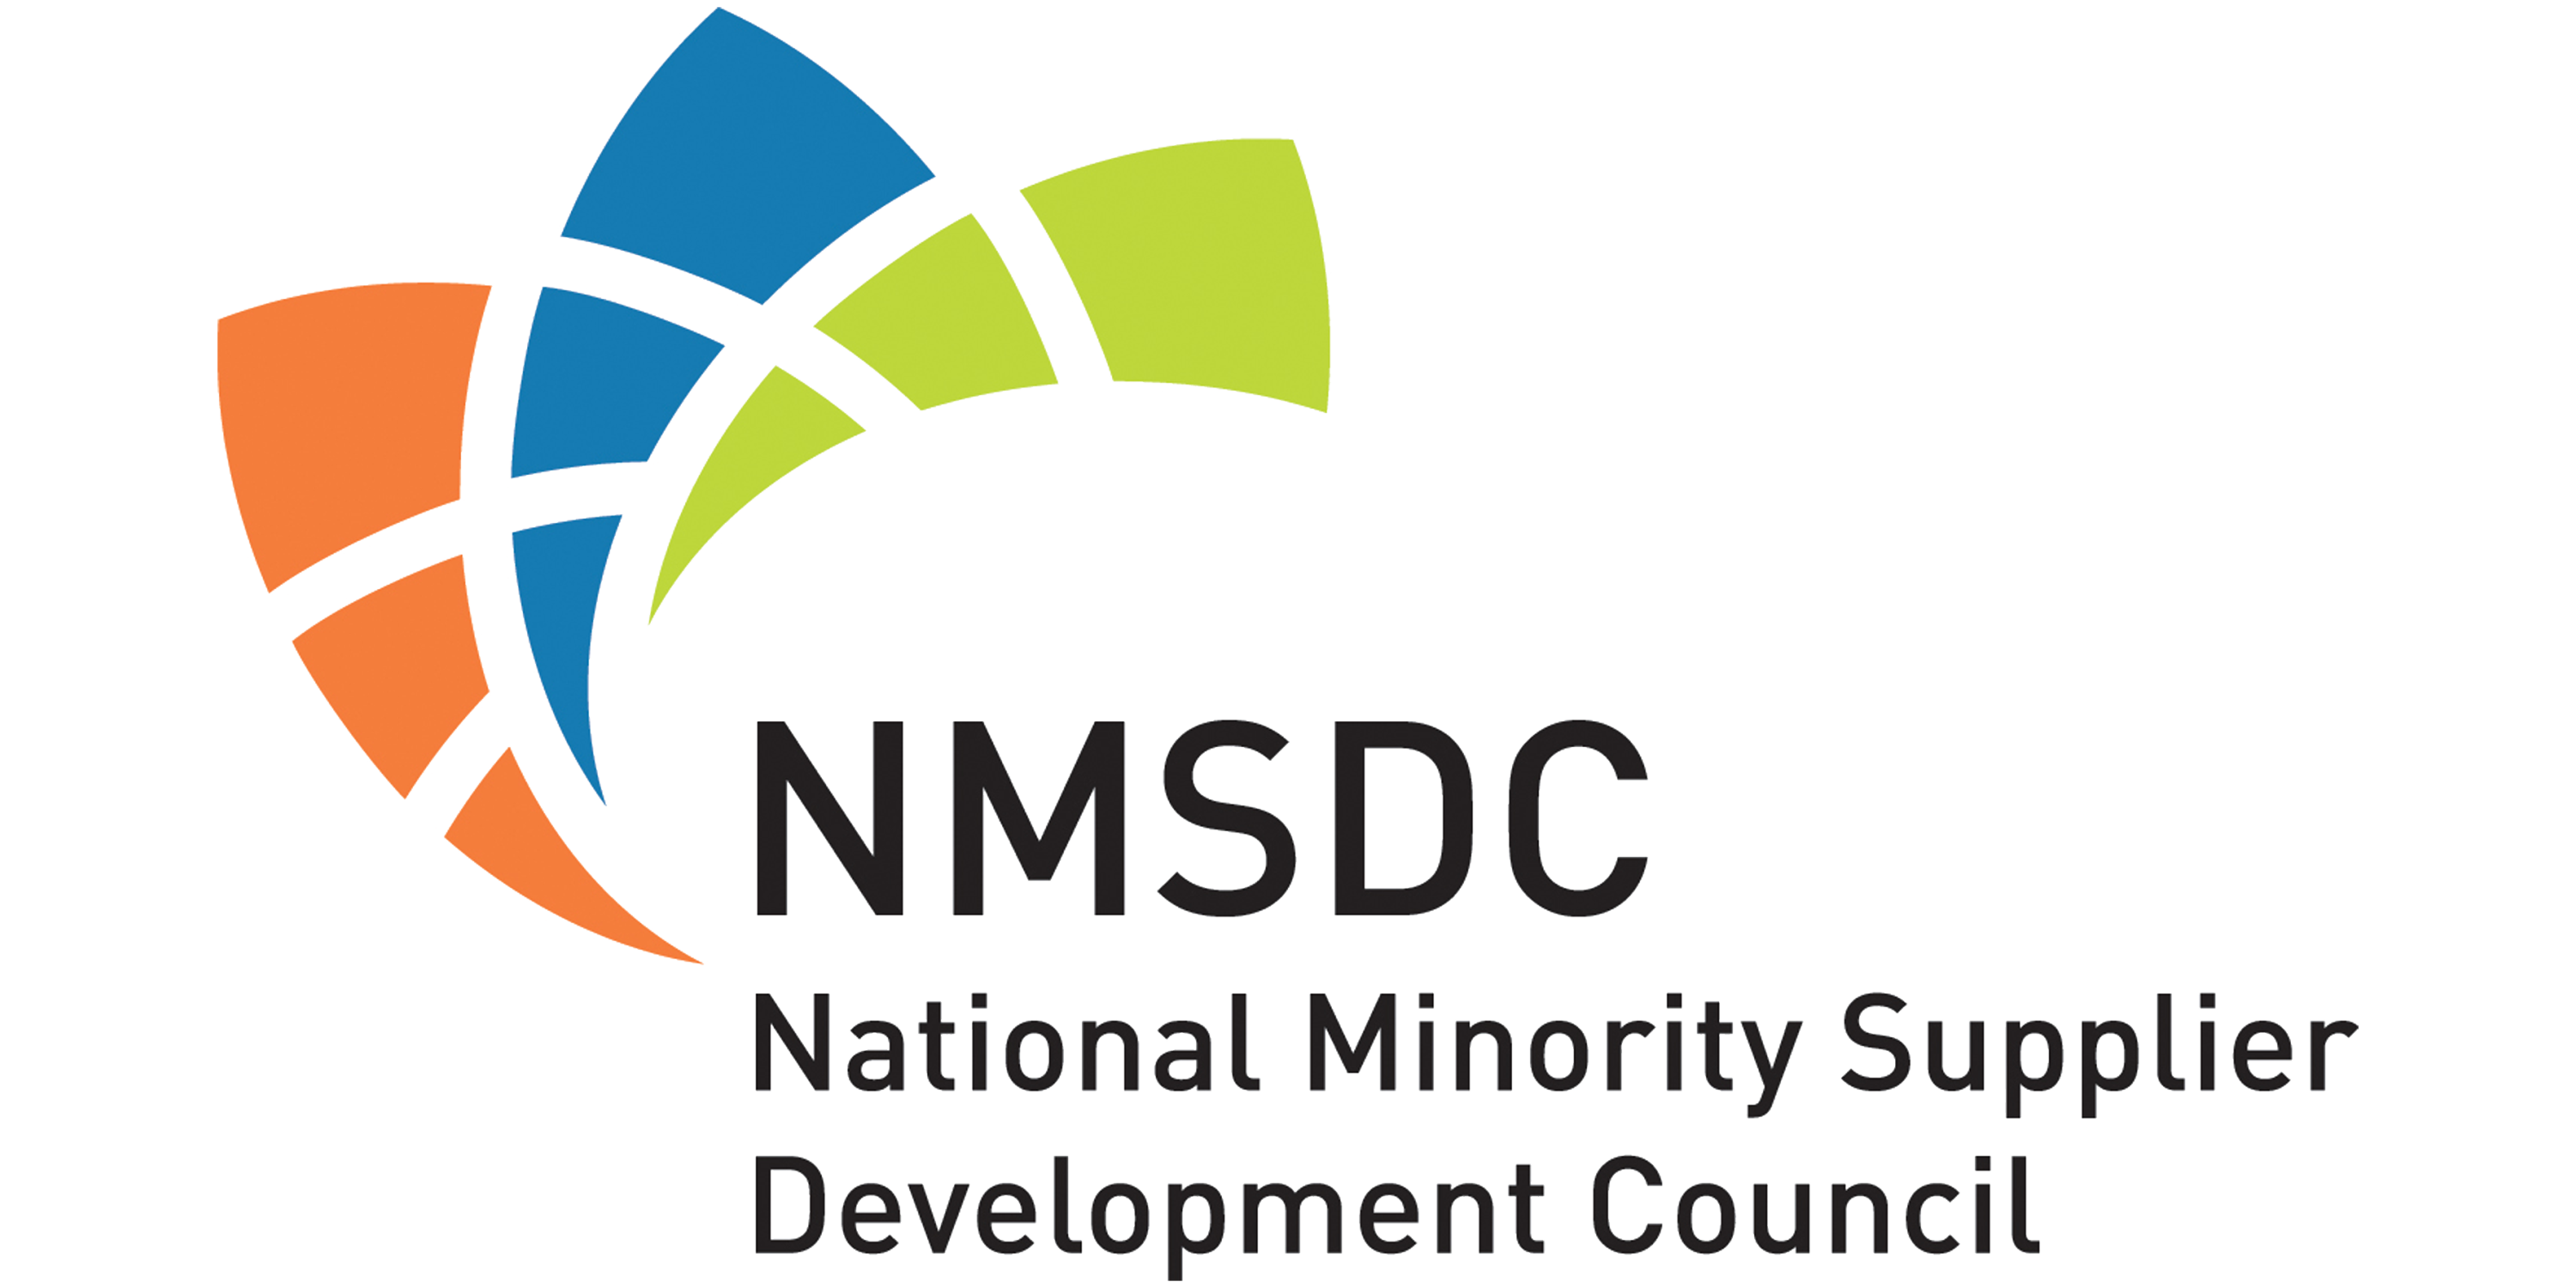 NMSDC-National-Minority-Supplier-Development-Council-logo_color_2to1